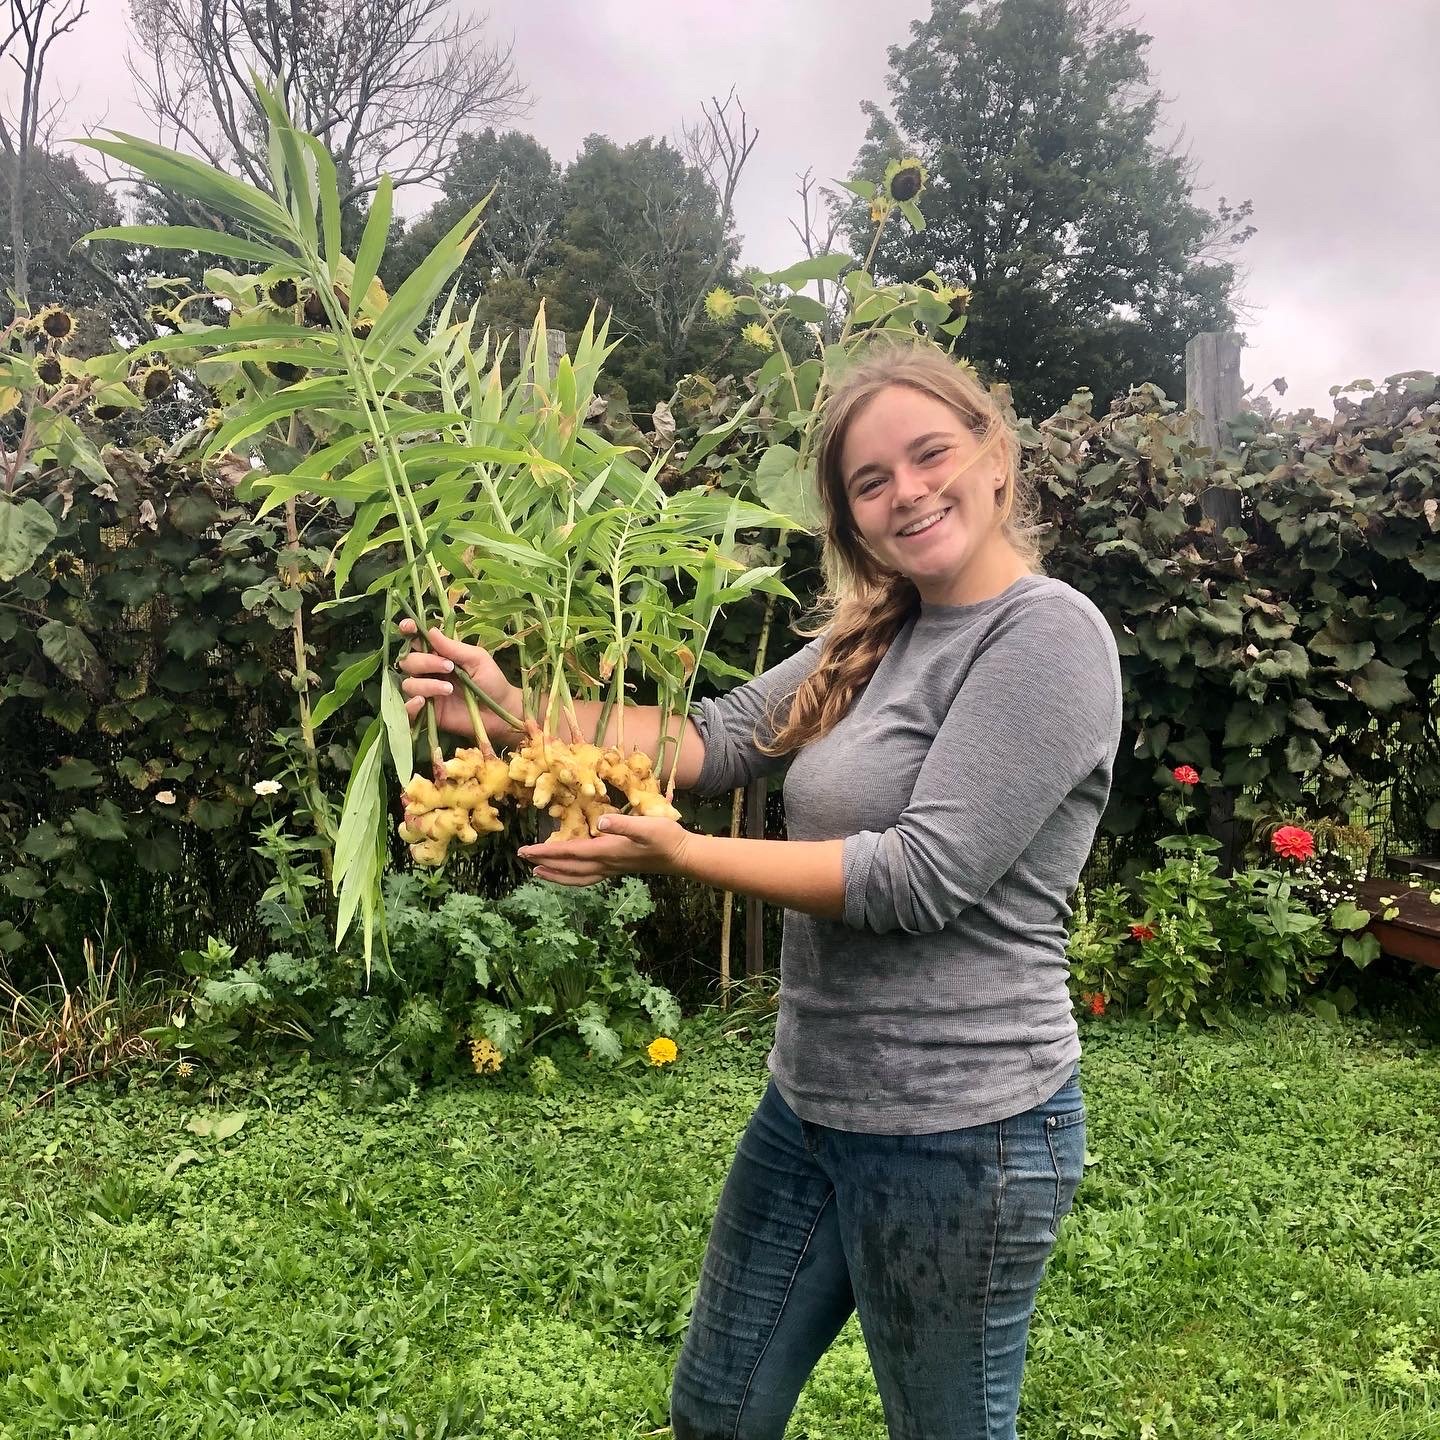 Farm/horticulture assistant Carly shows off freshly harvested ginger.